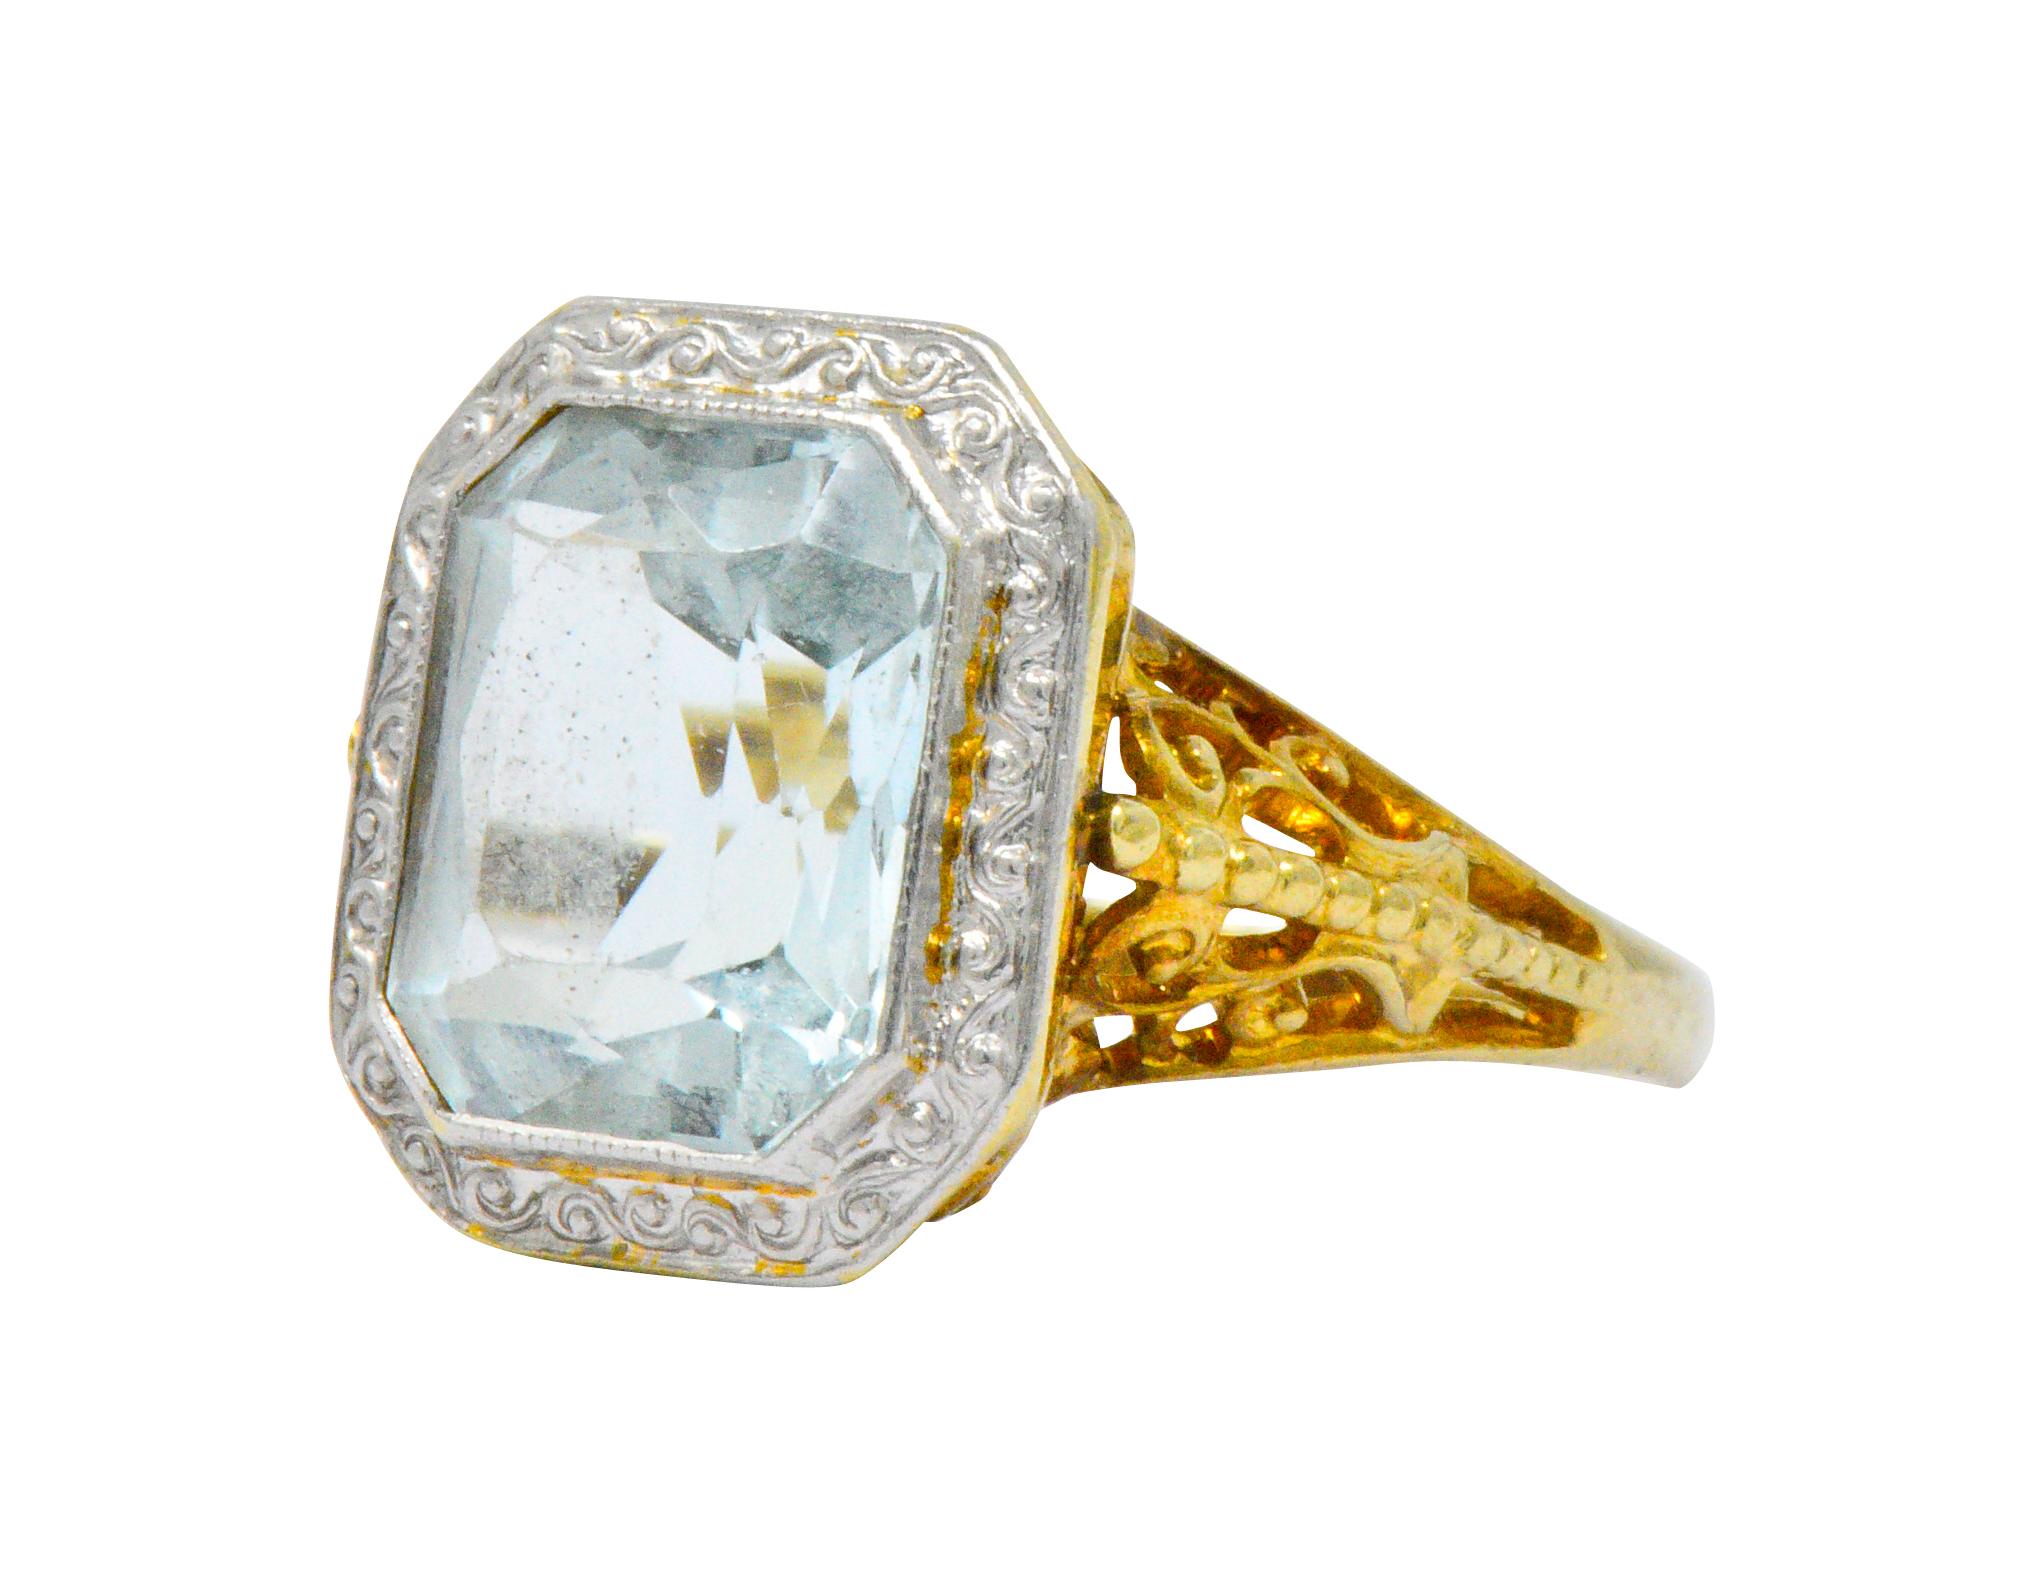 Centering a cut-corner scissor cut aquamarine weighing approximately 3.00 carats, very slightly light greenish blue

With a scrolling platinum surround

Highly detailed pierced stylized gold gallery

Tested as 14 karat gold

Circa 1910

Ring Size: 6